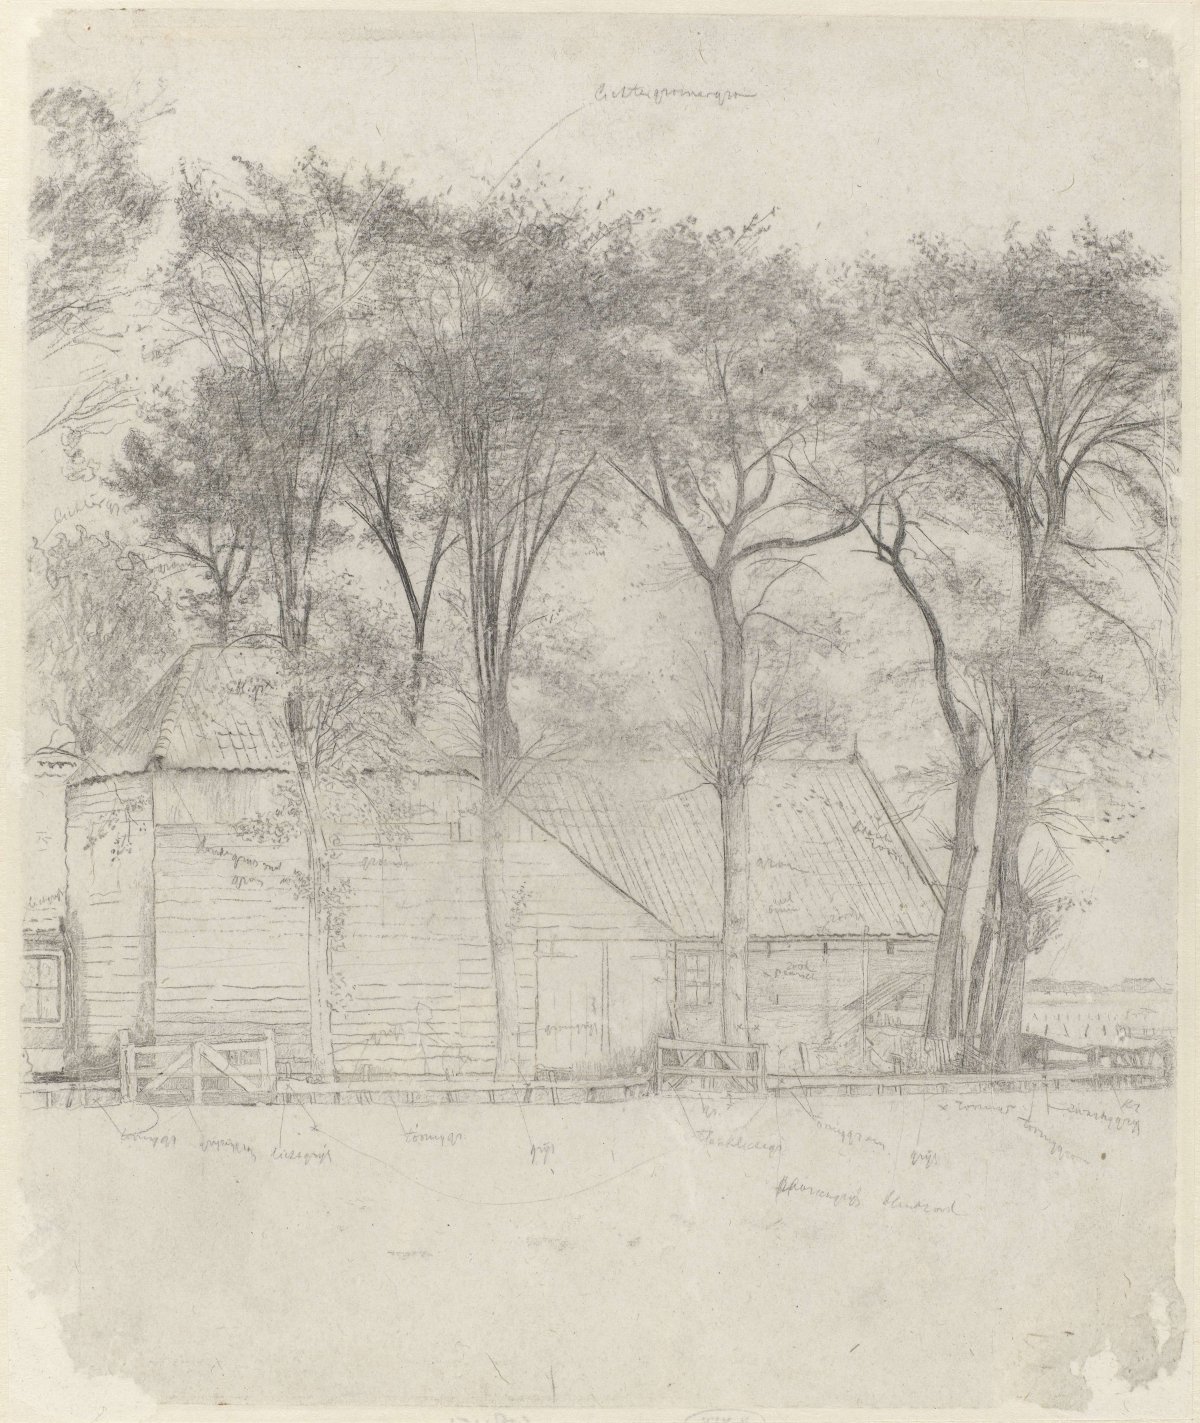 Farm near Velzen: the two barns seen from the side, surrounded by tall trees, Gerrit Willem Dijsselhof, 1876 - 1924